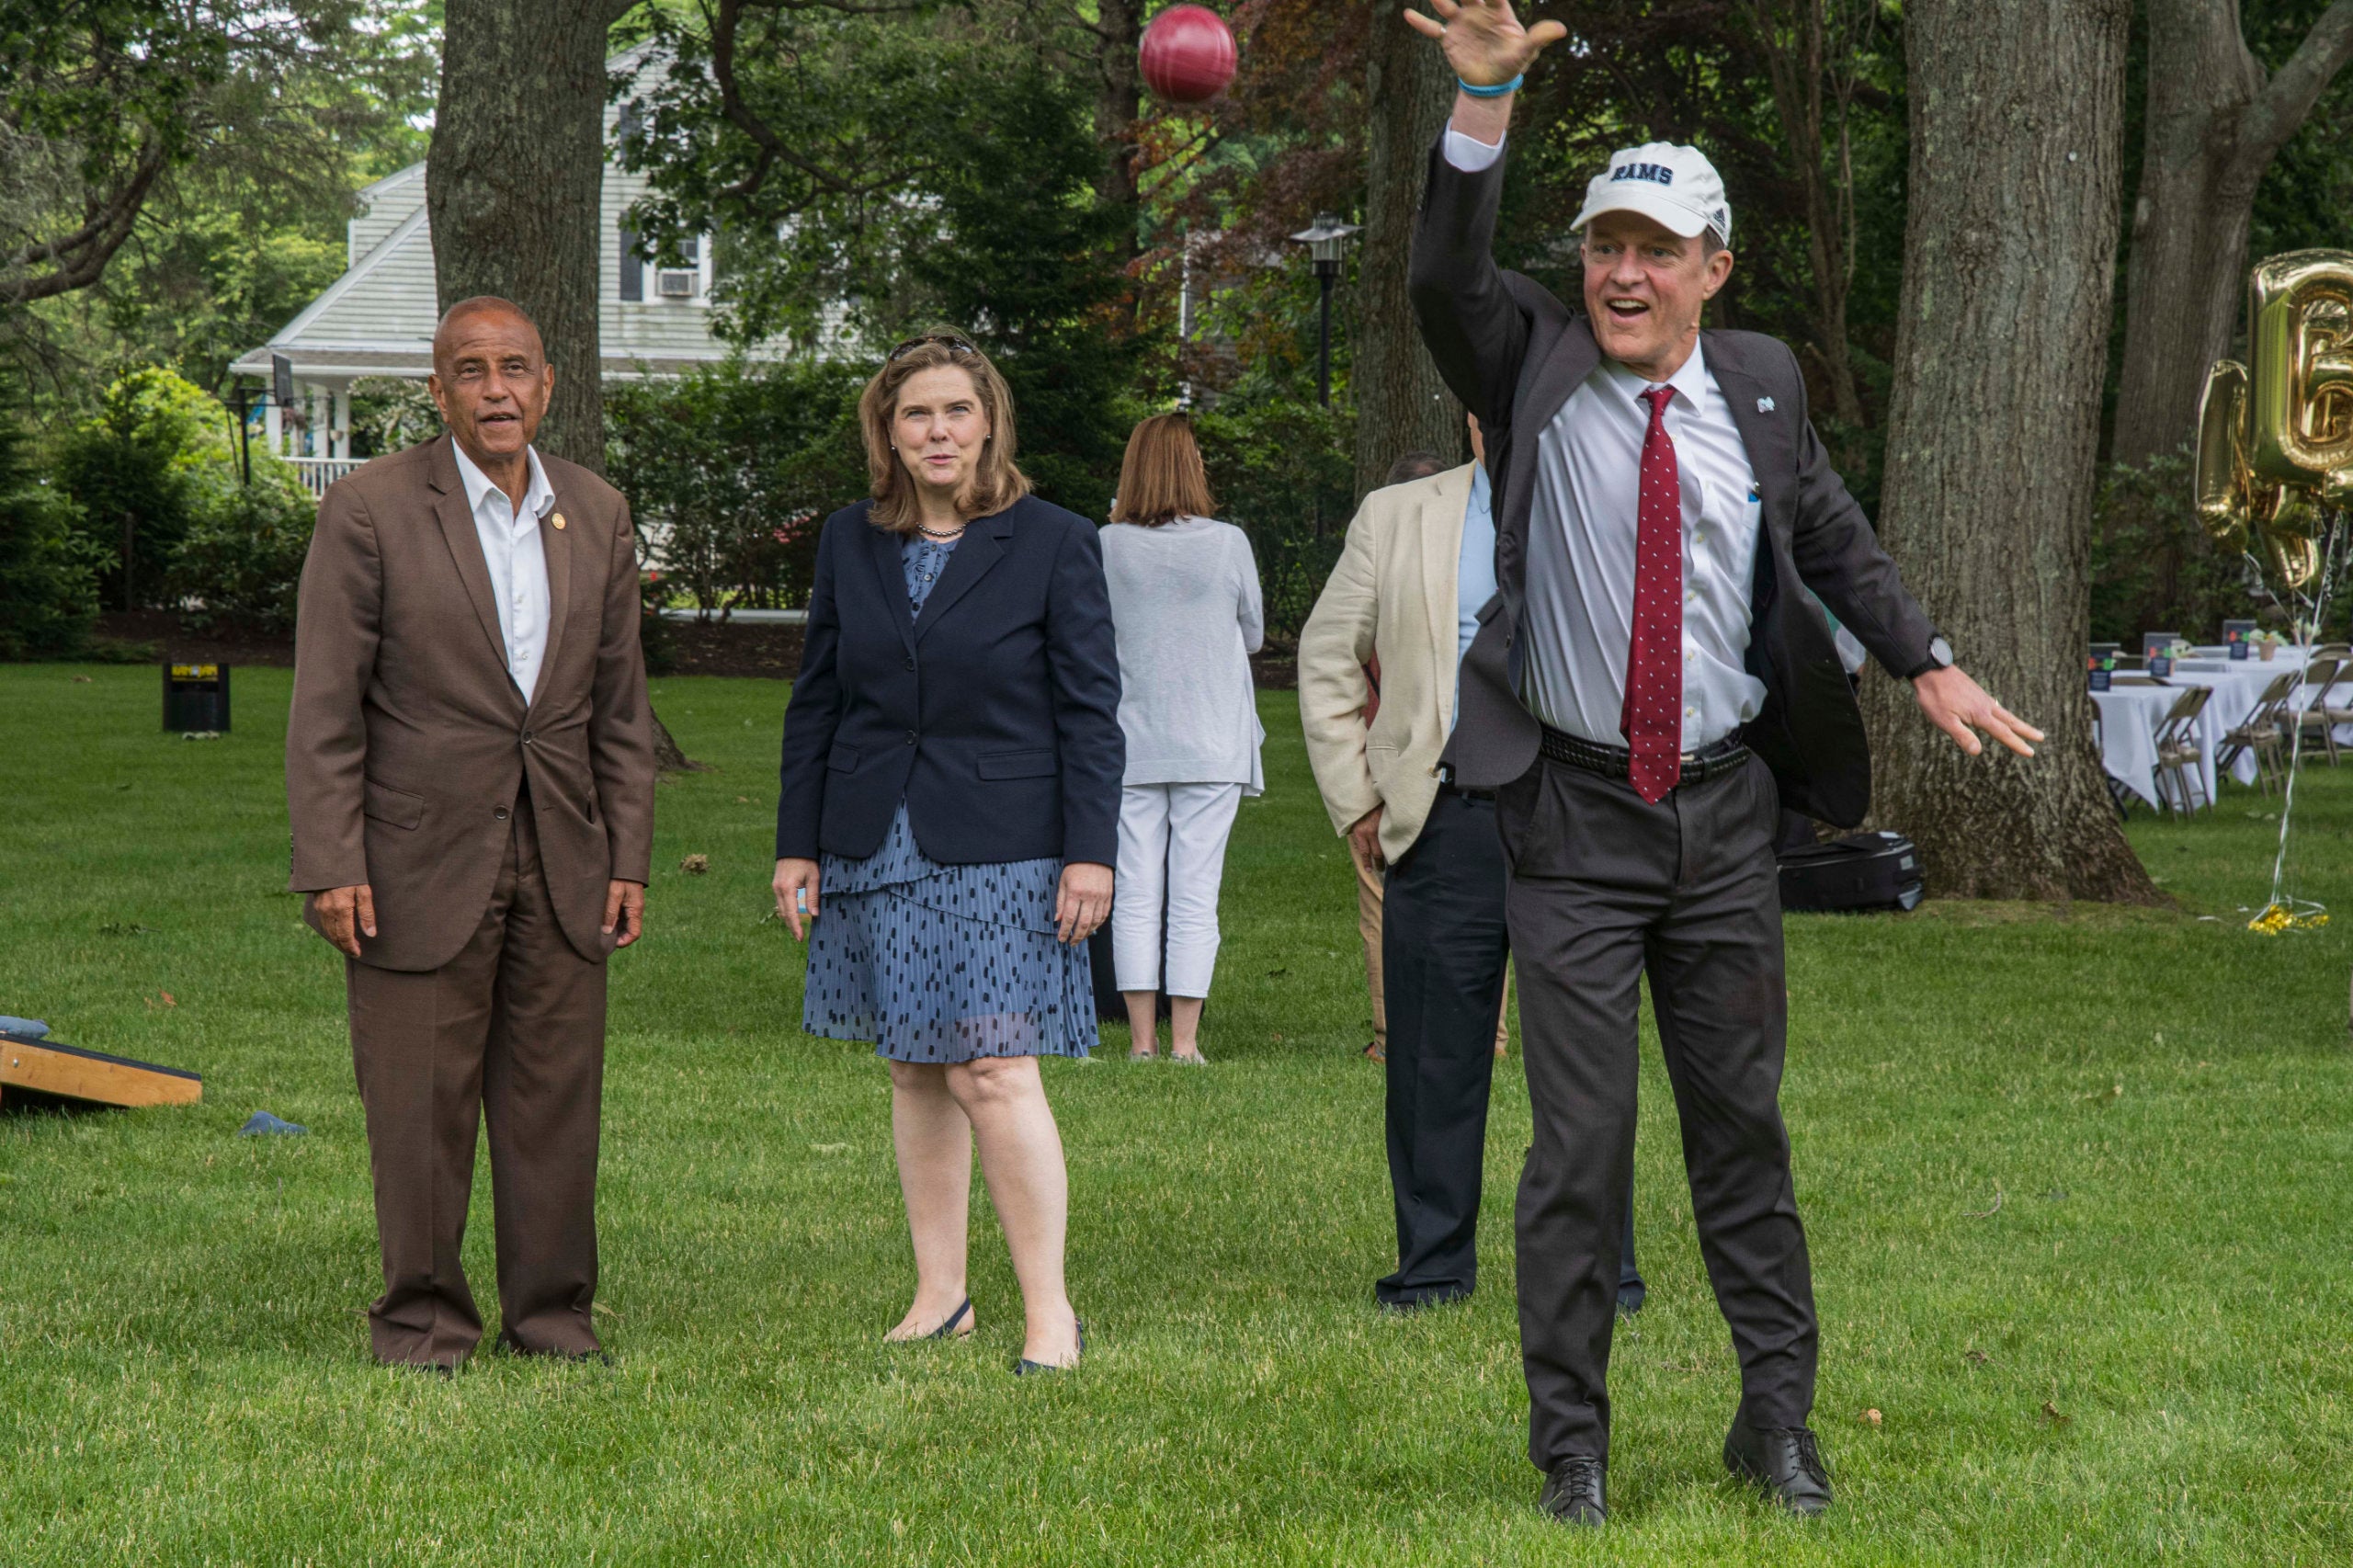 President Marc Parlange plays lawn games with Jim Vincent, Head of the Providence NAACP as part of the 2022 Juneteenth Celebration